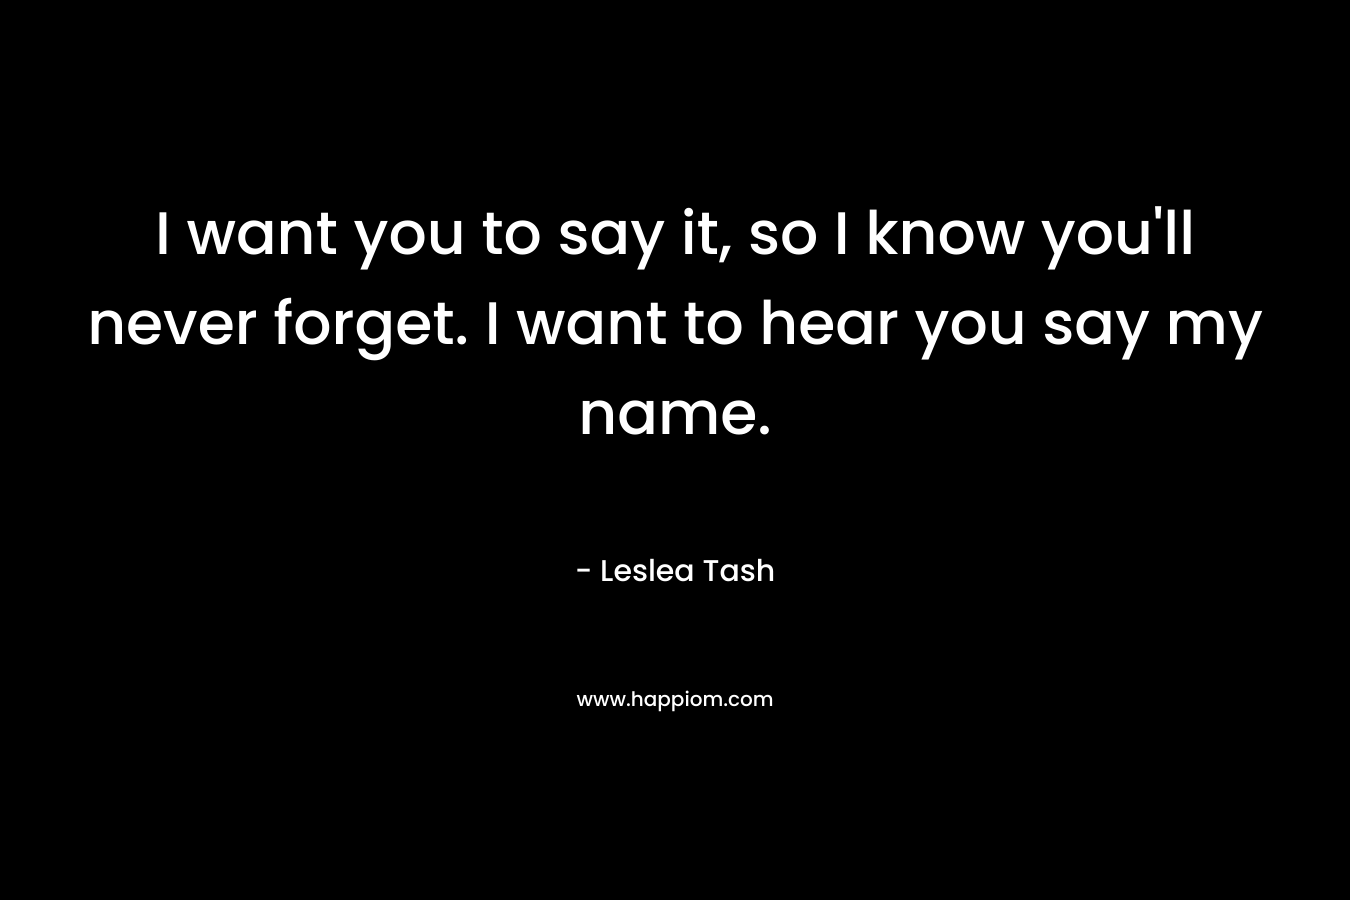 I want you to say it, so I know you’ll never forget. I want to hear you say my name. – Leslea Tash